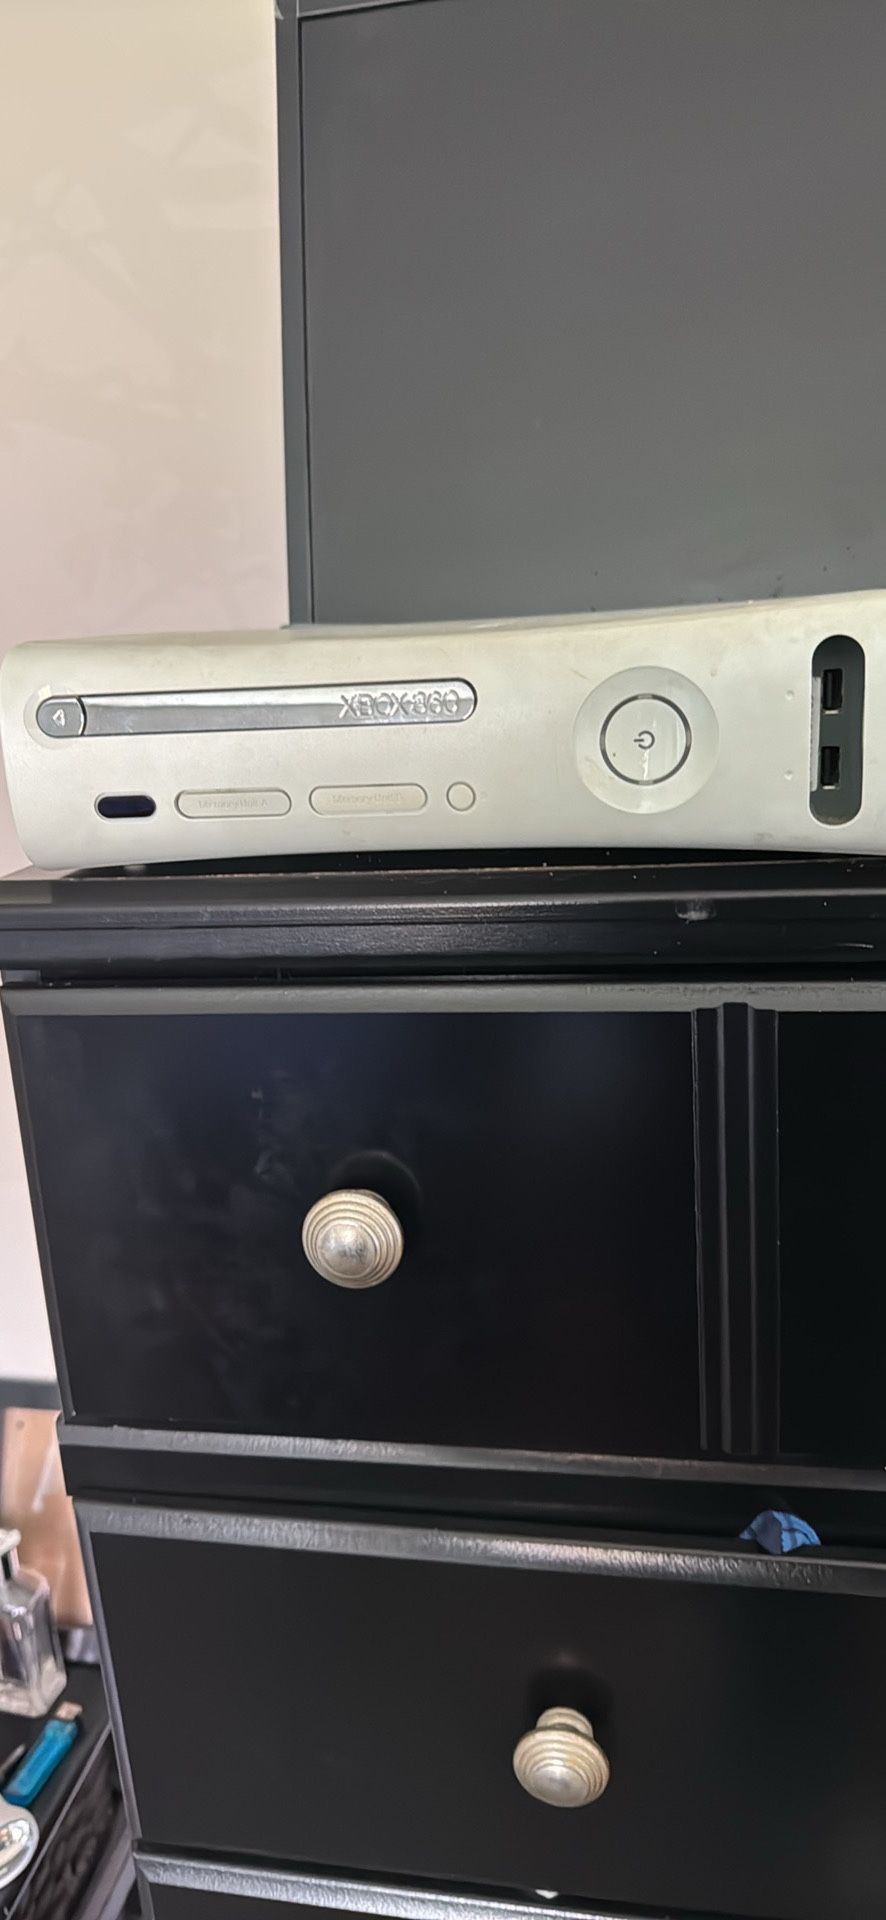 Xbox 360 With Games